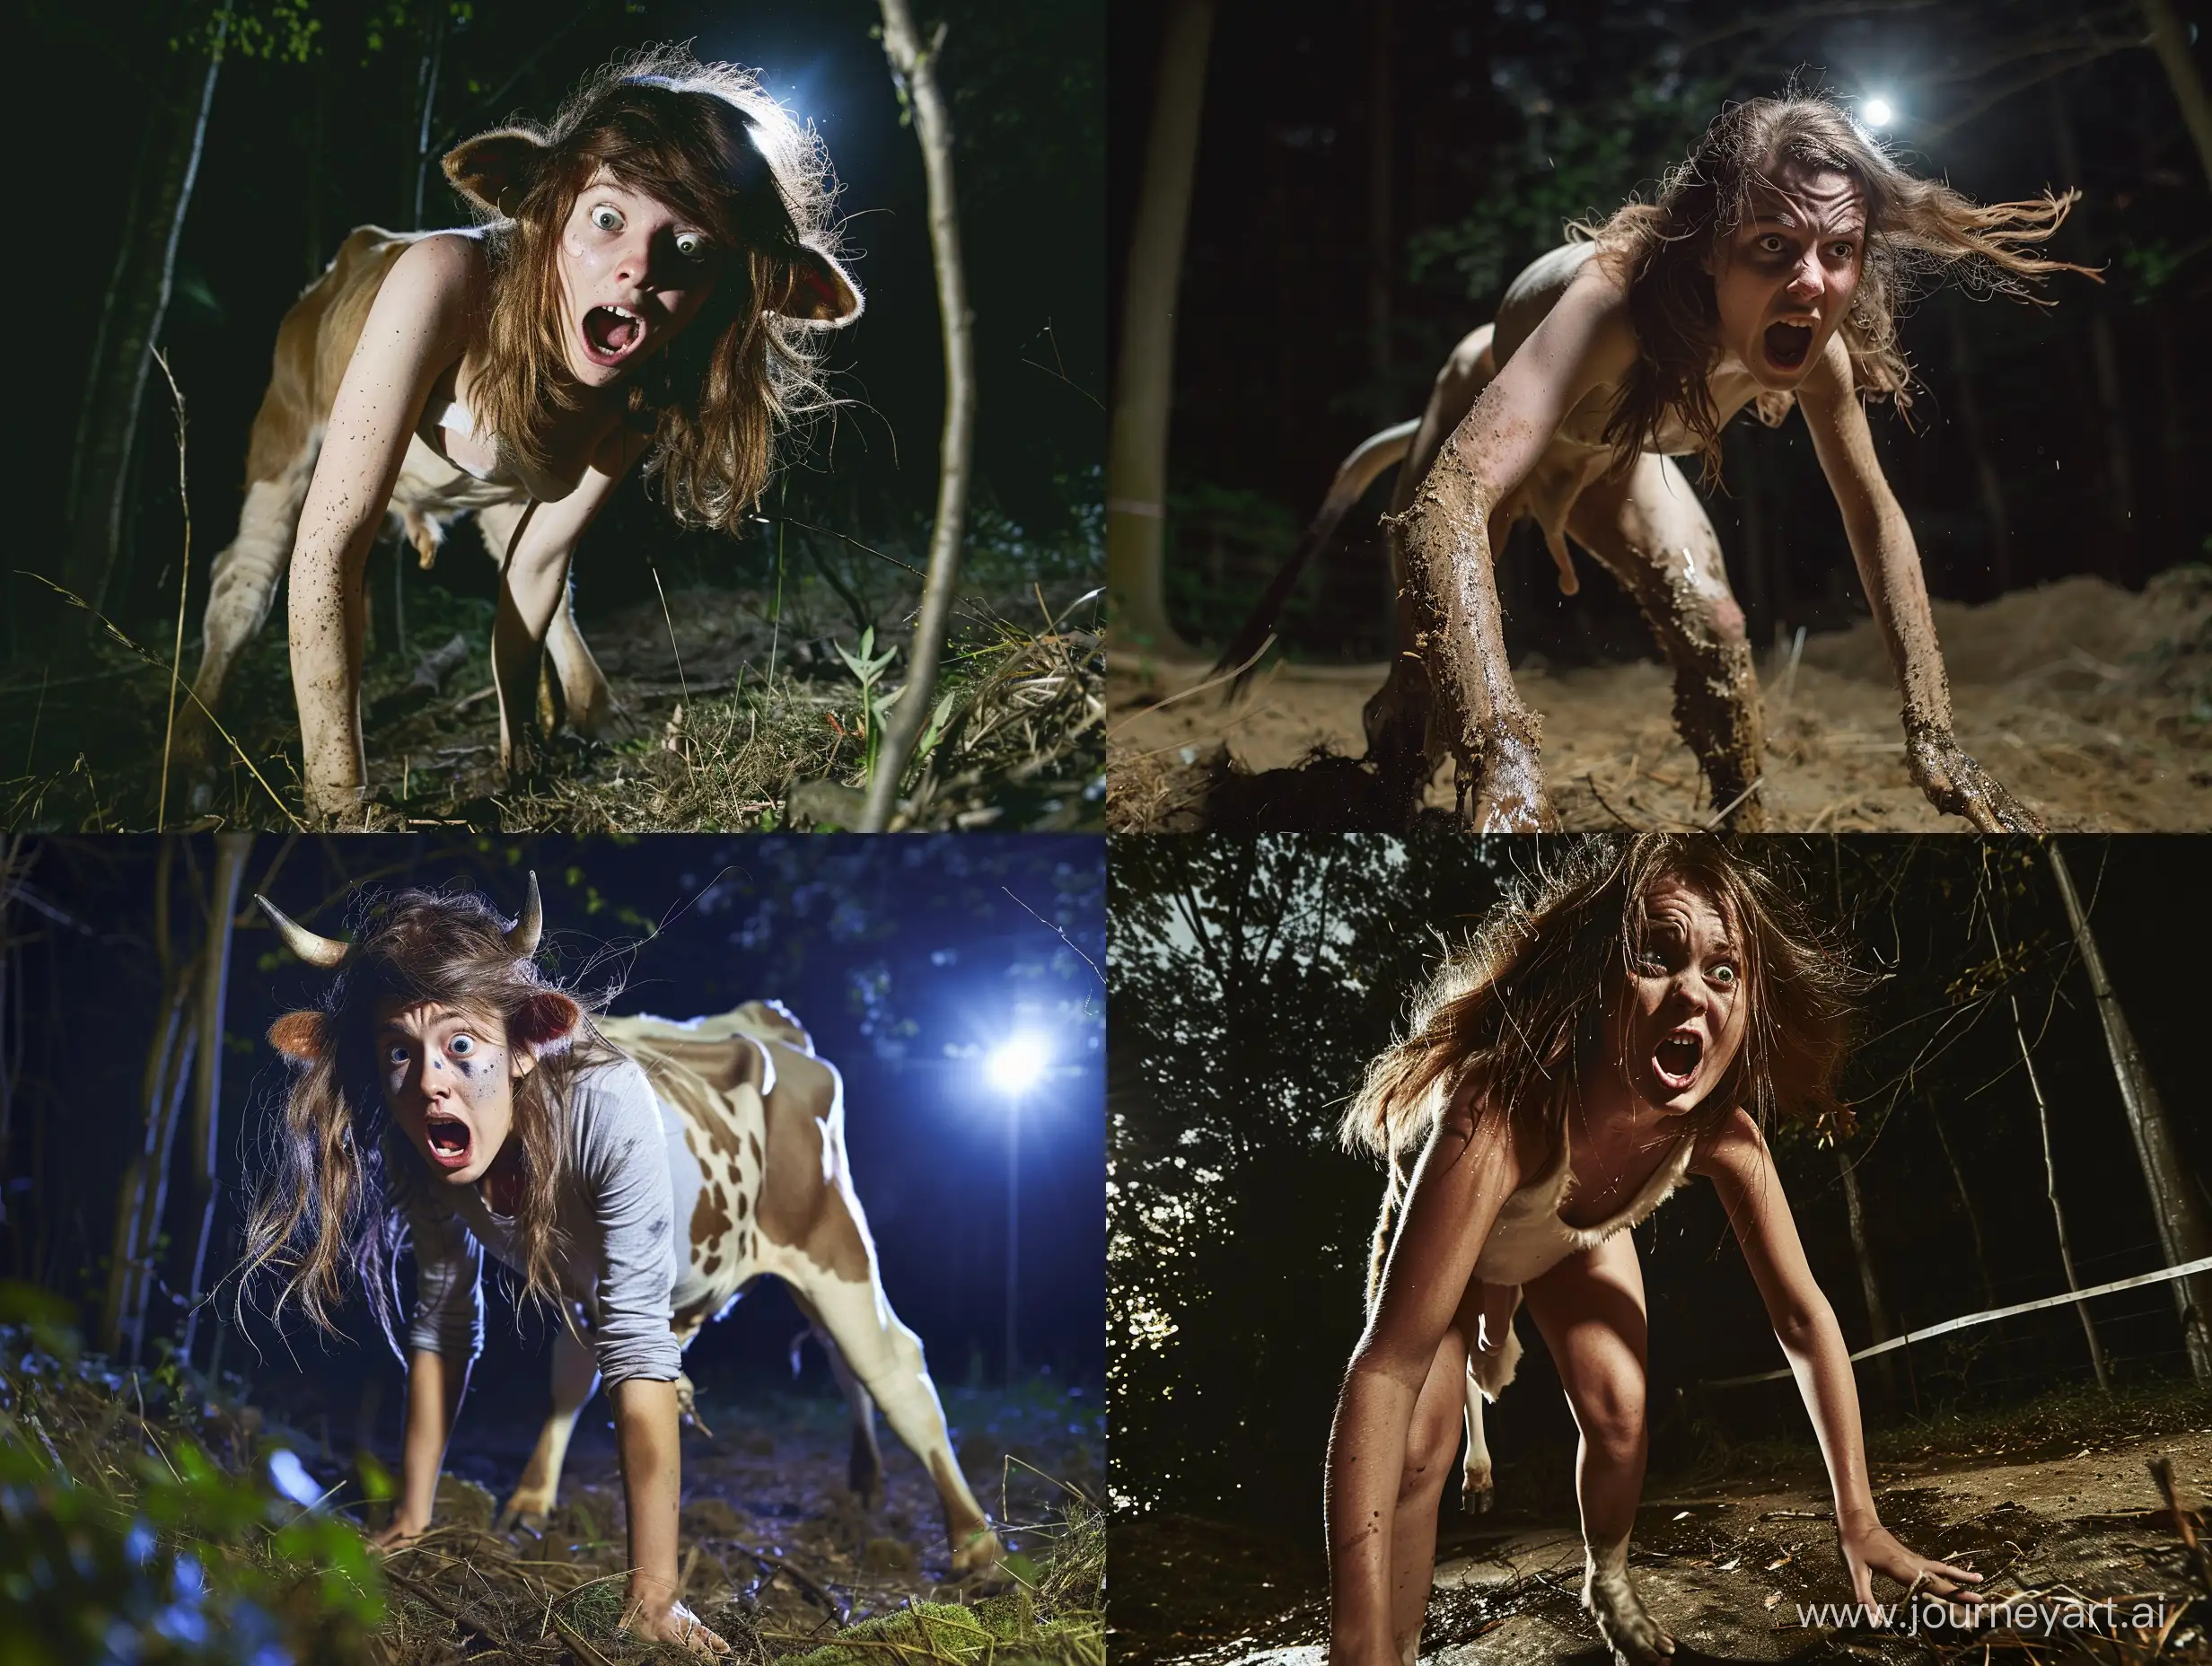 Desperate-Young-Woman-Transforming-into-a-Cow-in-Night-Forest